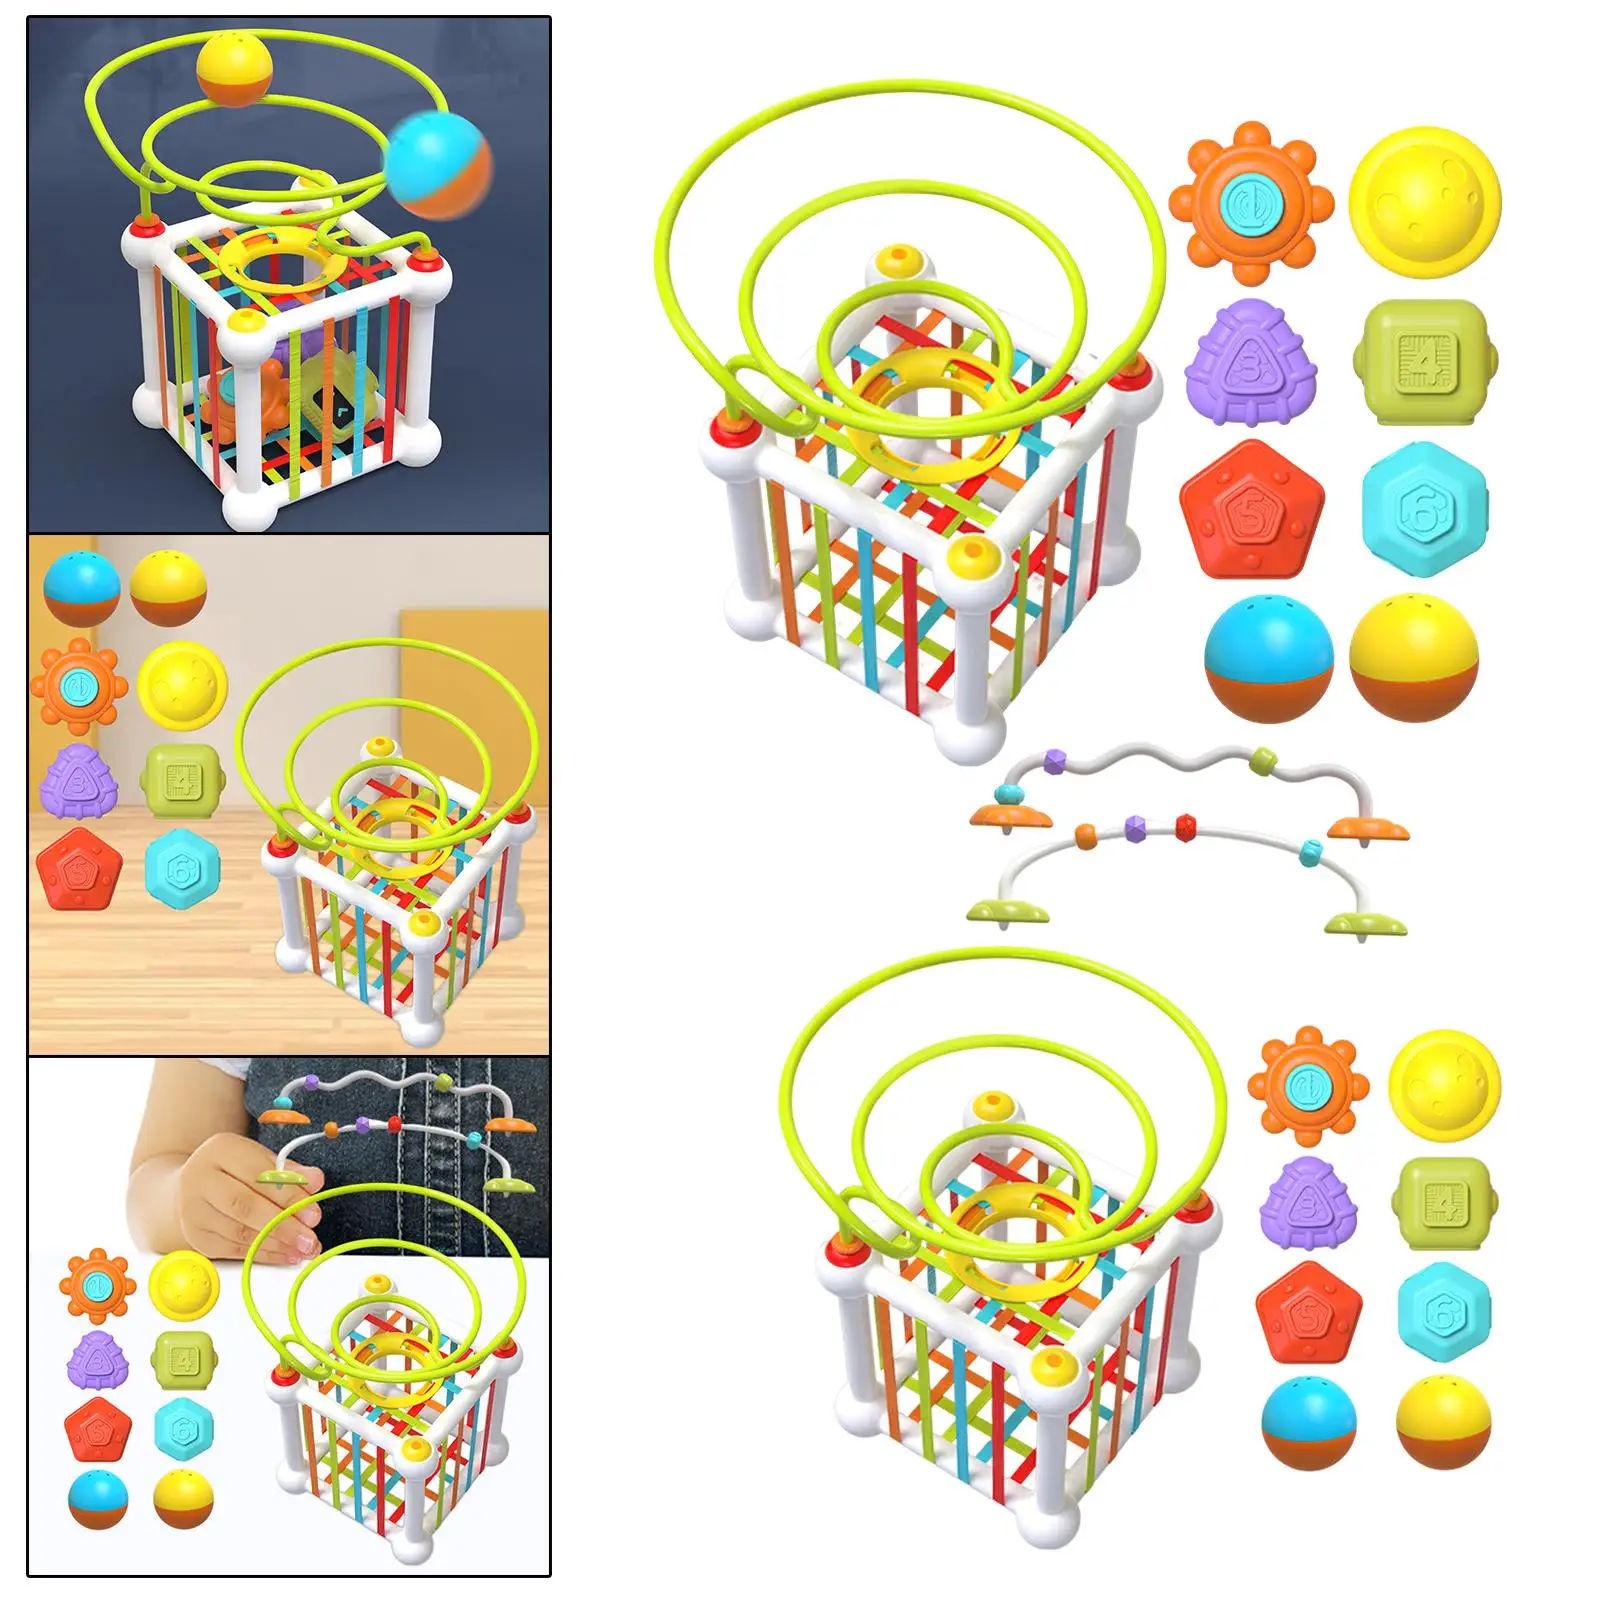 Textured Balls Sorting Games Matching for Coordination Imagination Activity